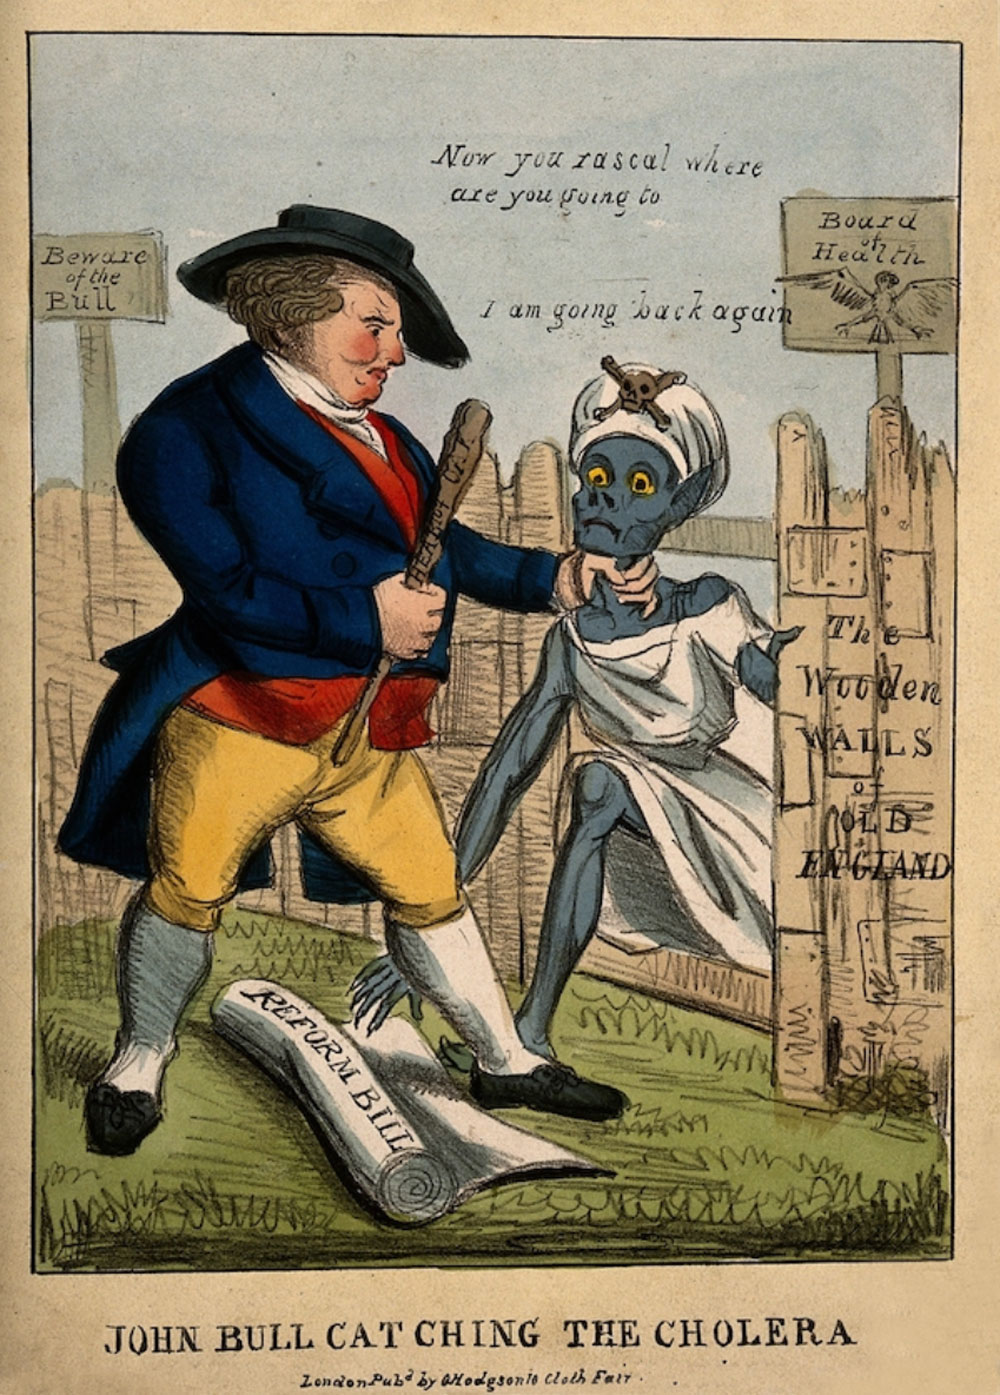 A cartoon of John Bull, the personification of England, dealing with cholera as it tried to gain access to Great Britian.